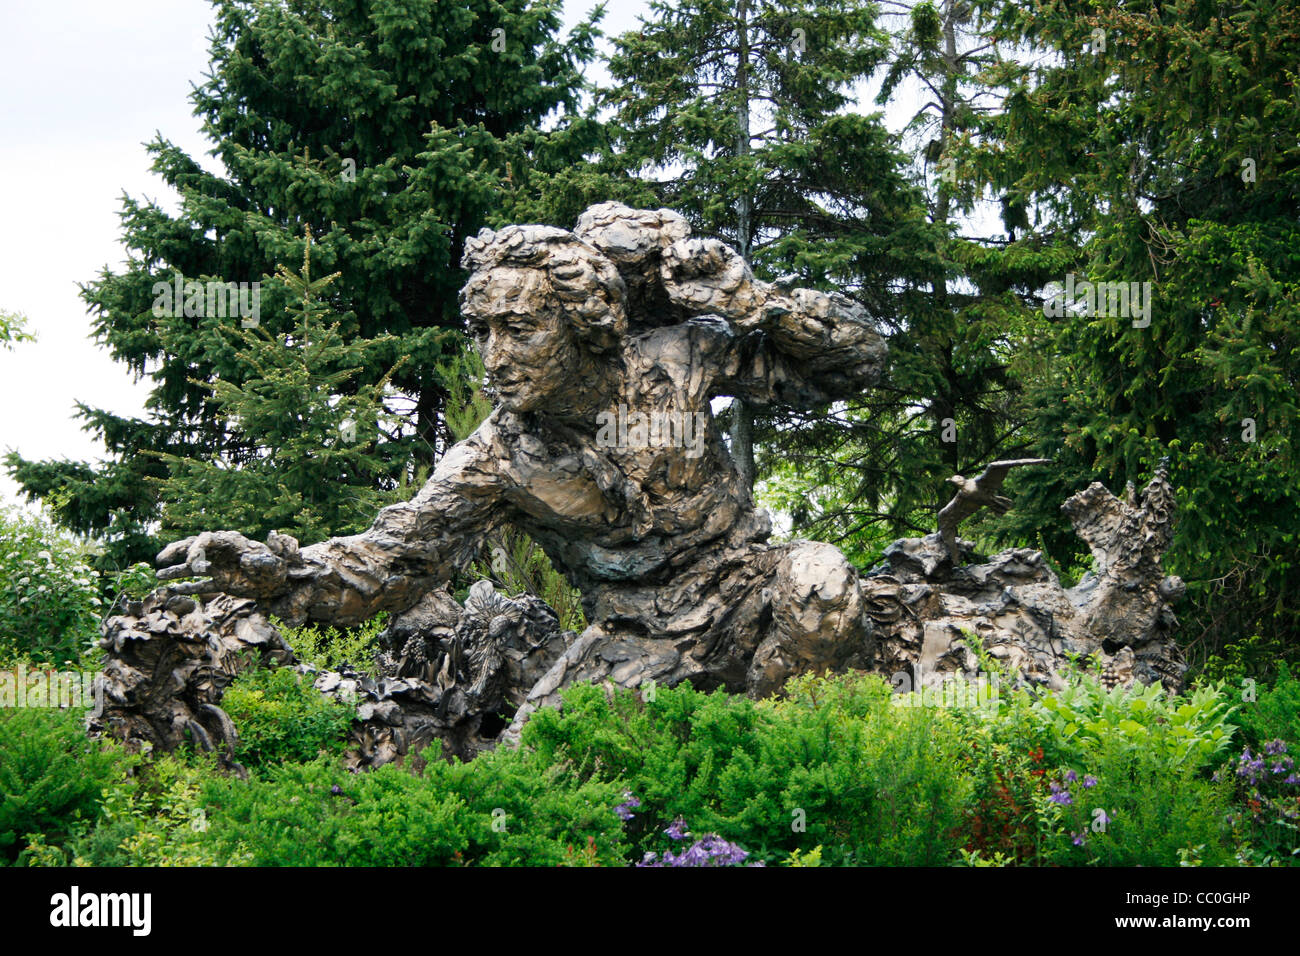 Chicago, Illinosis - May 23, 2008:The Carl Linnaeus sculpture by Robert Berks at the Chicago Botanic Garden  (For editorial use) Stock Photo